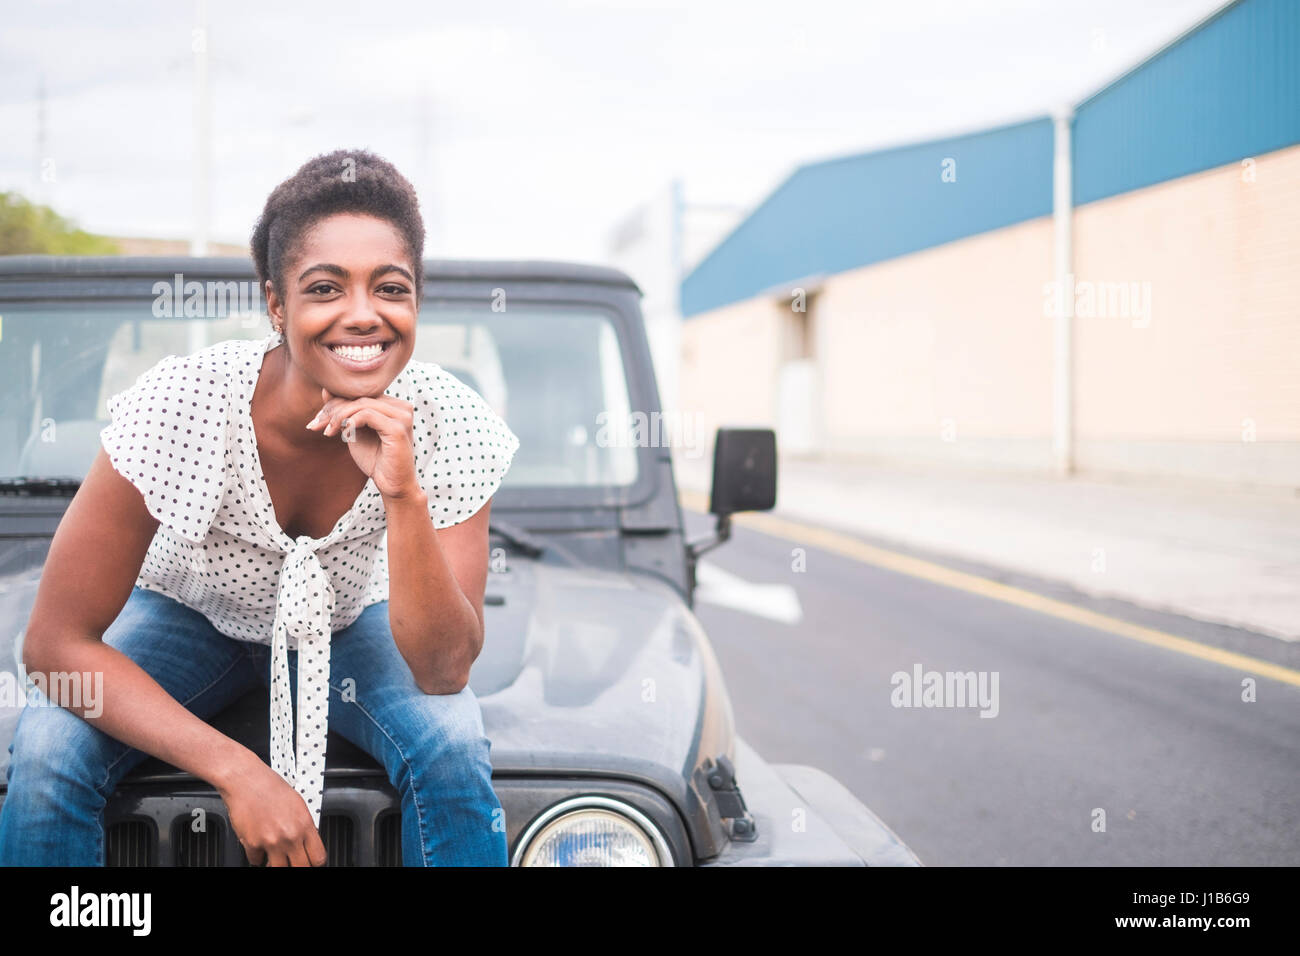 Smiling African American woman sitting on hood of car Stock Photo